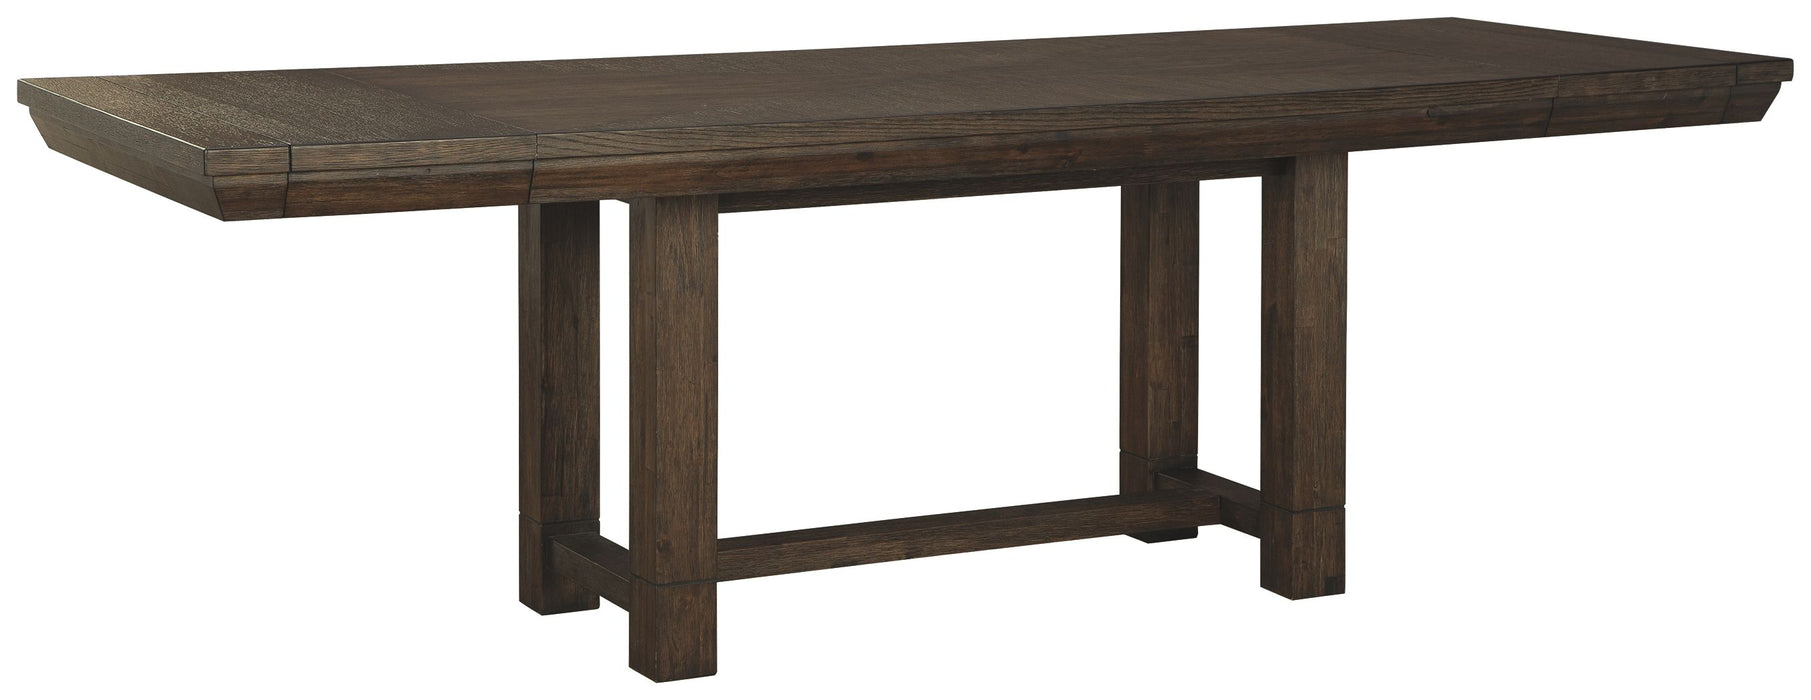 Dellbeck - Rect Dining Room Ext Table